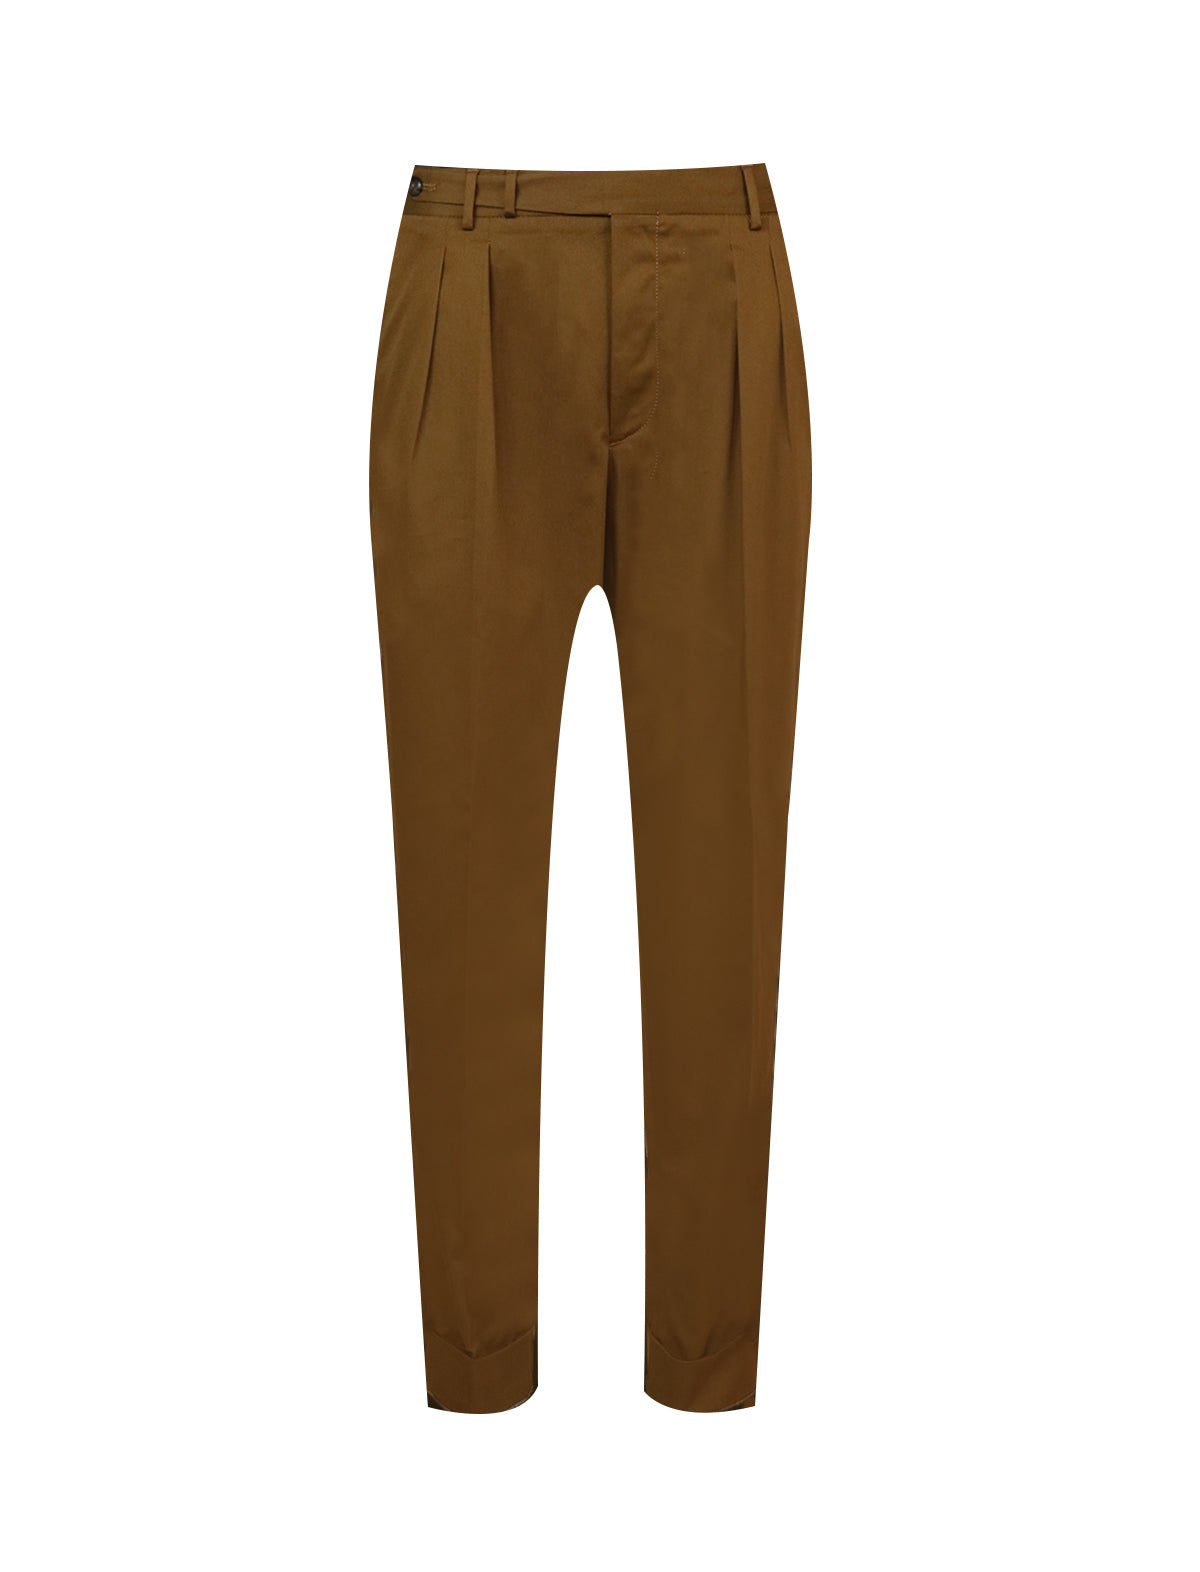 PT Torino Reworked Trouser in Brown